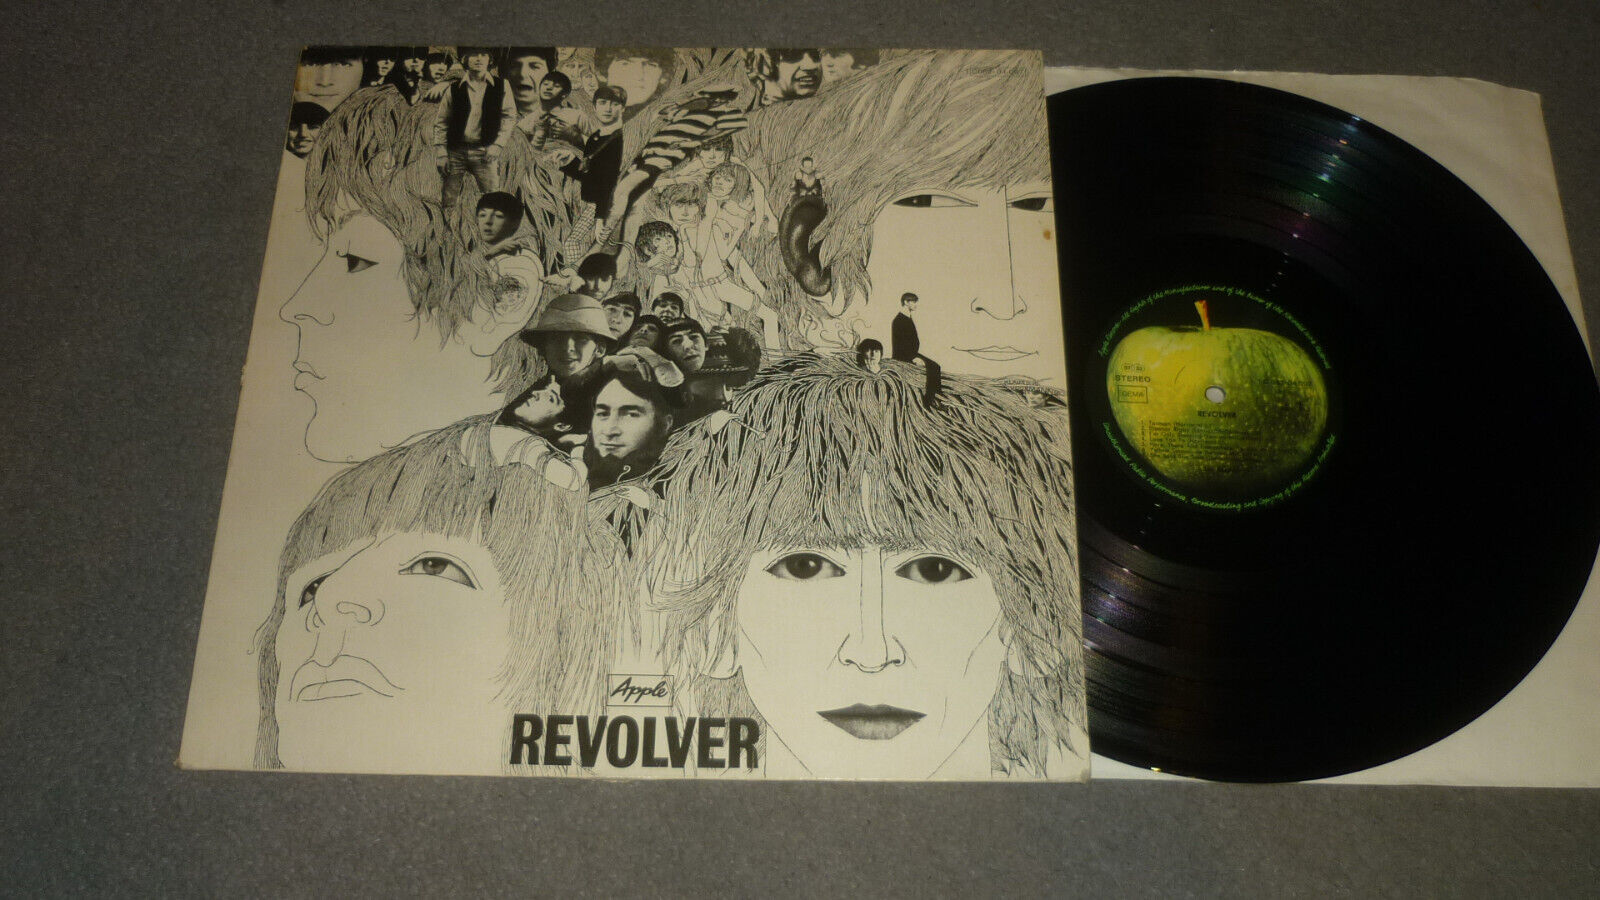 The Beatles - Revolver - Apple 1C 062-04 097 Germany 1976 Early German - VG+